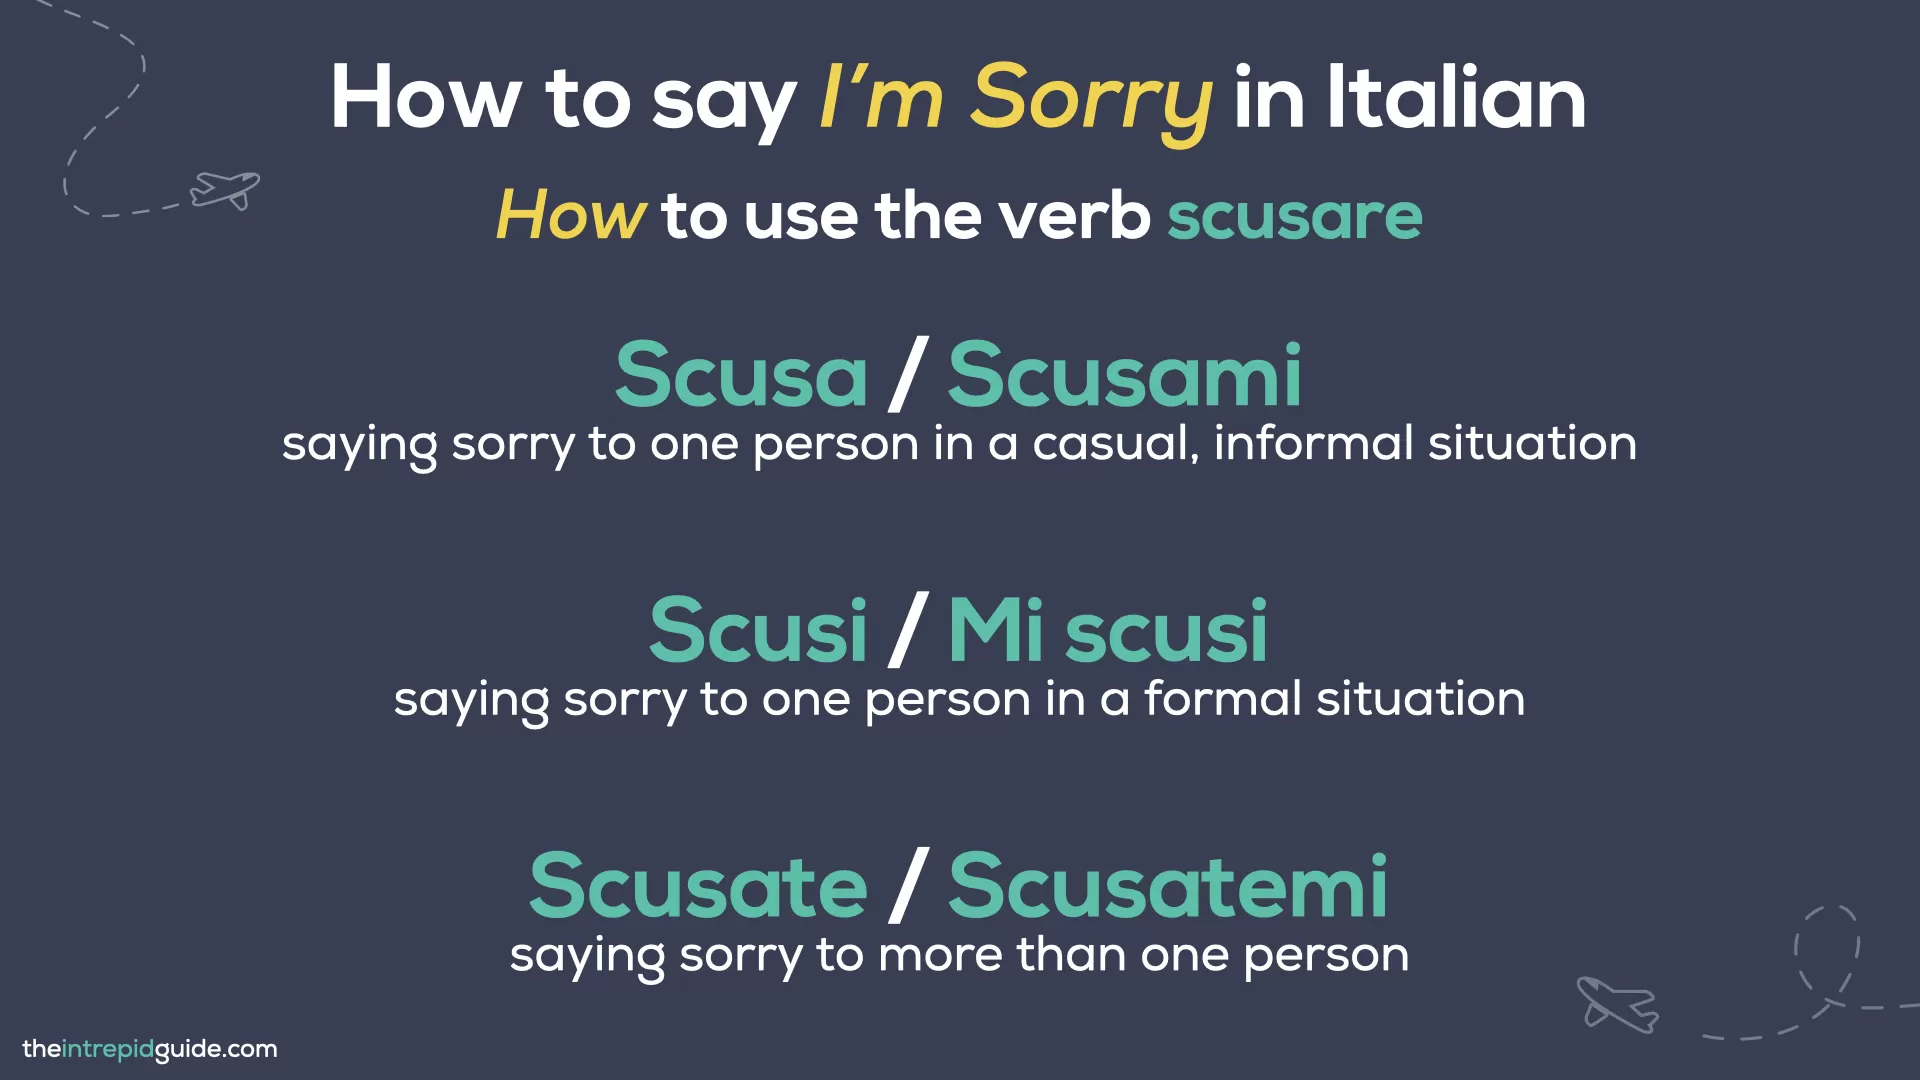 I'm sorry in Italian - How to use the verb scusare